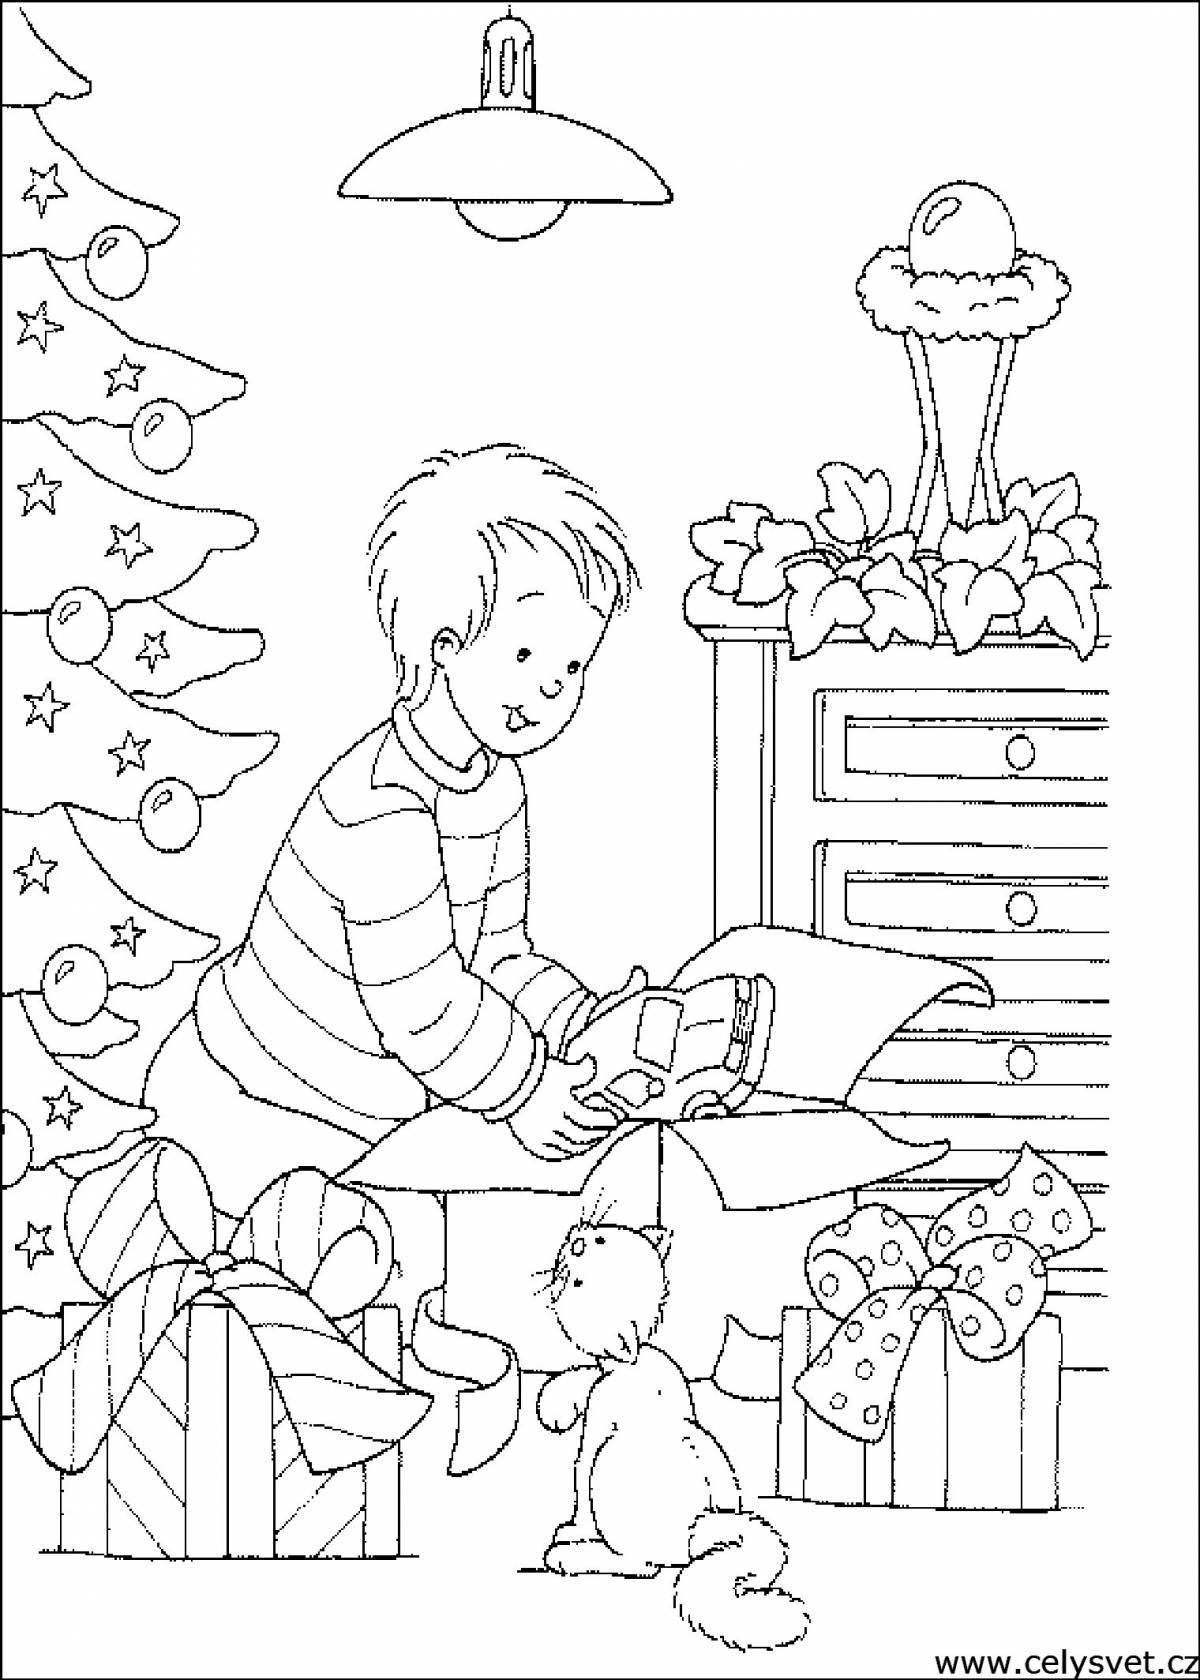 Sparkling Christmas family coloring book